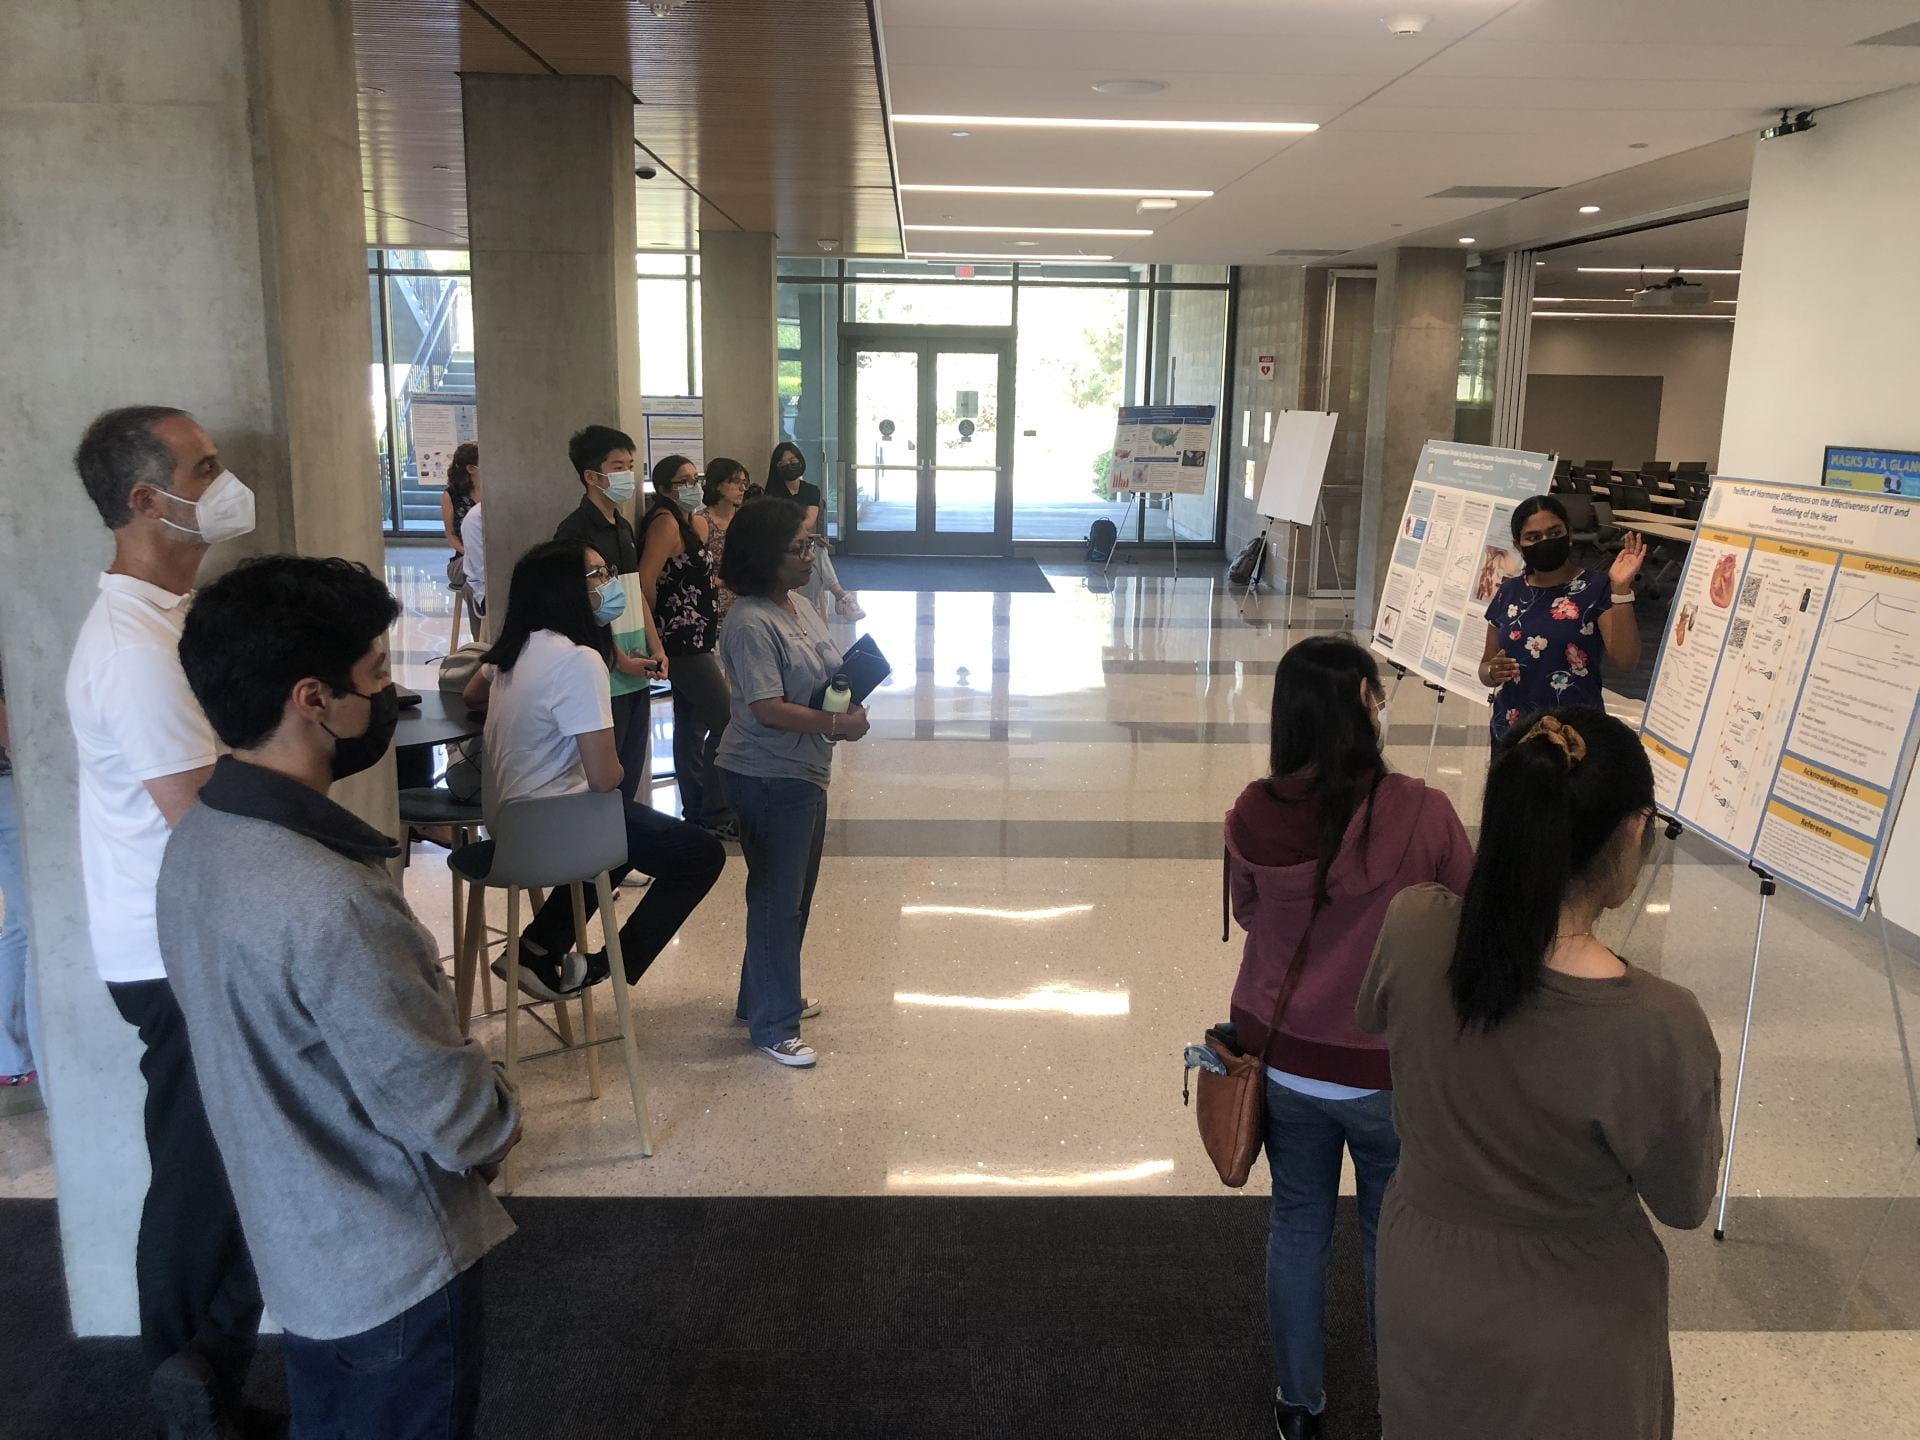 Undergraduate students in the Samueli Interdisciplinary Research in Pods program gather in the lobby of UCI’s Interdisciplinary Science and Engineering Building for a poster session to discuss their summer research projects.